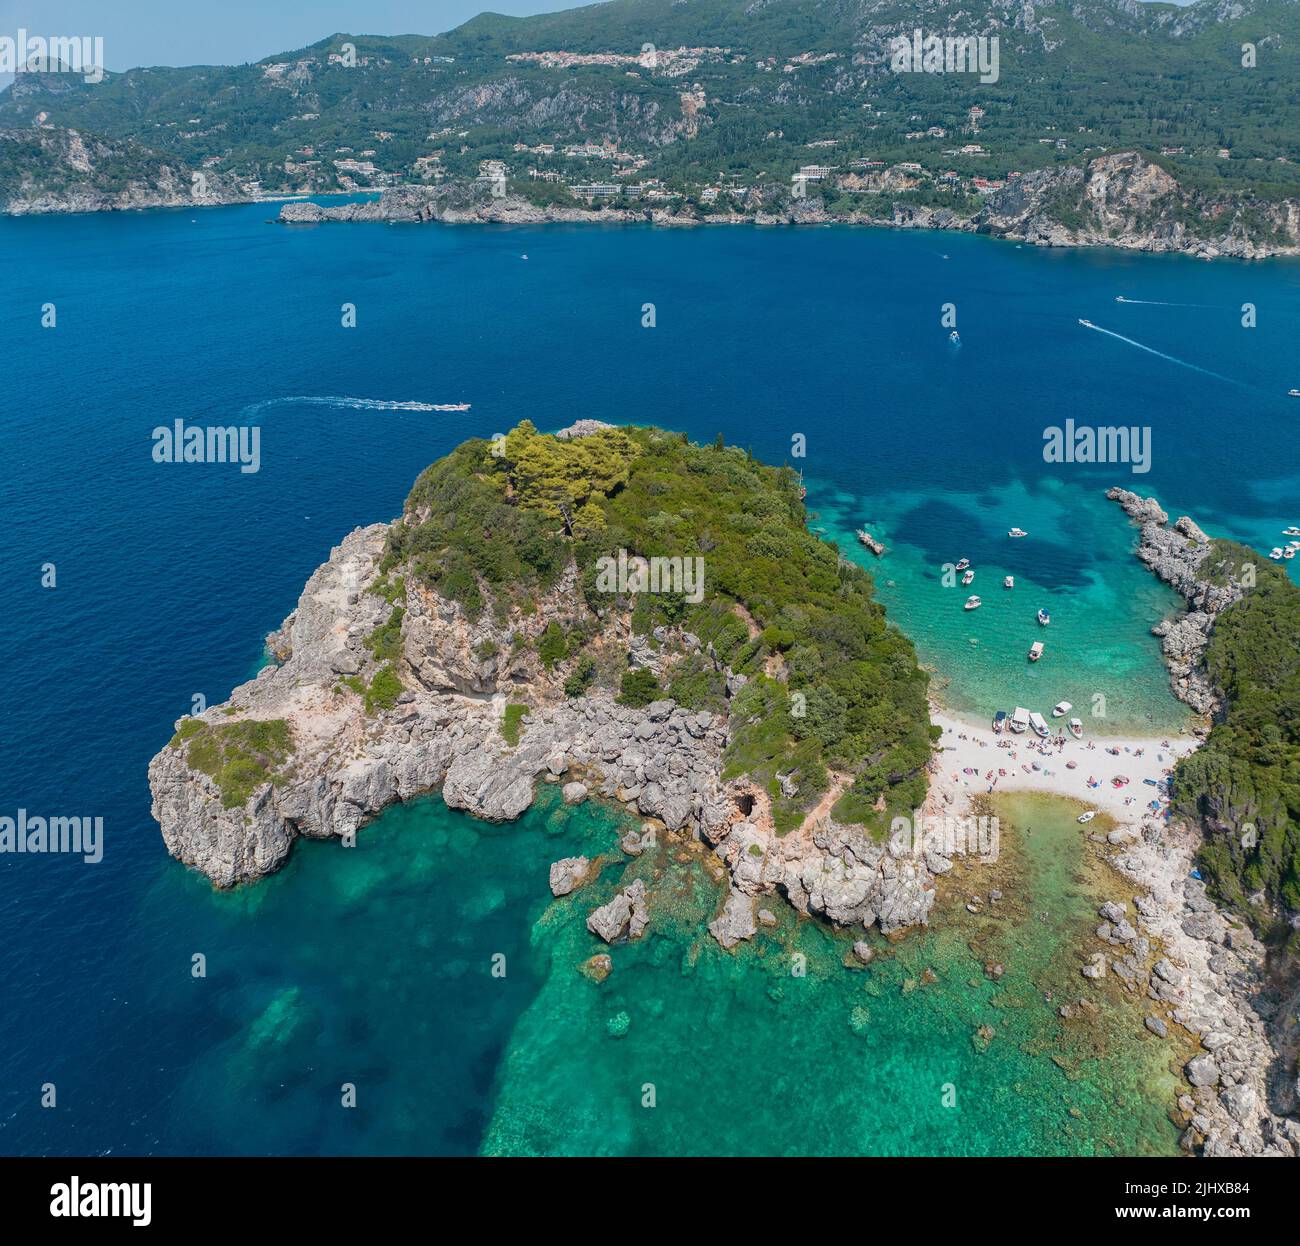 Aerial view of Limni Beach Glyko, on the island of Corfu. Greece. Where the two beaches are connected to the mainland providing a wonderful scenery Stock Photo